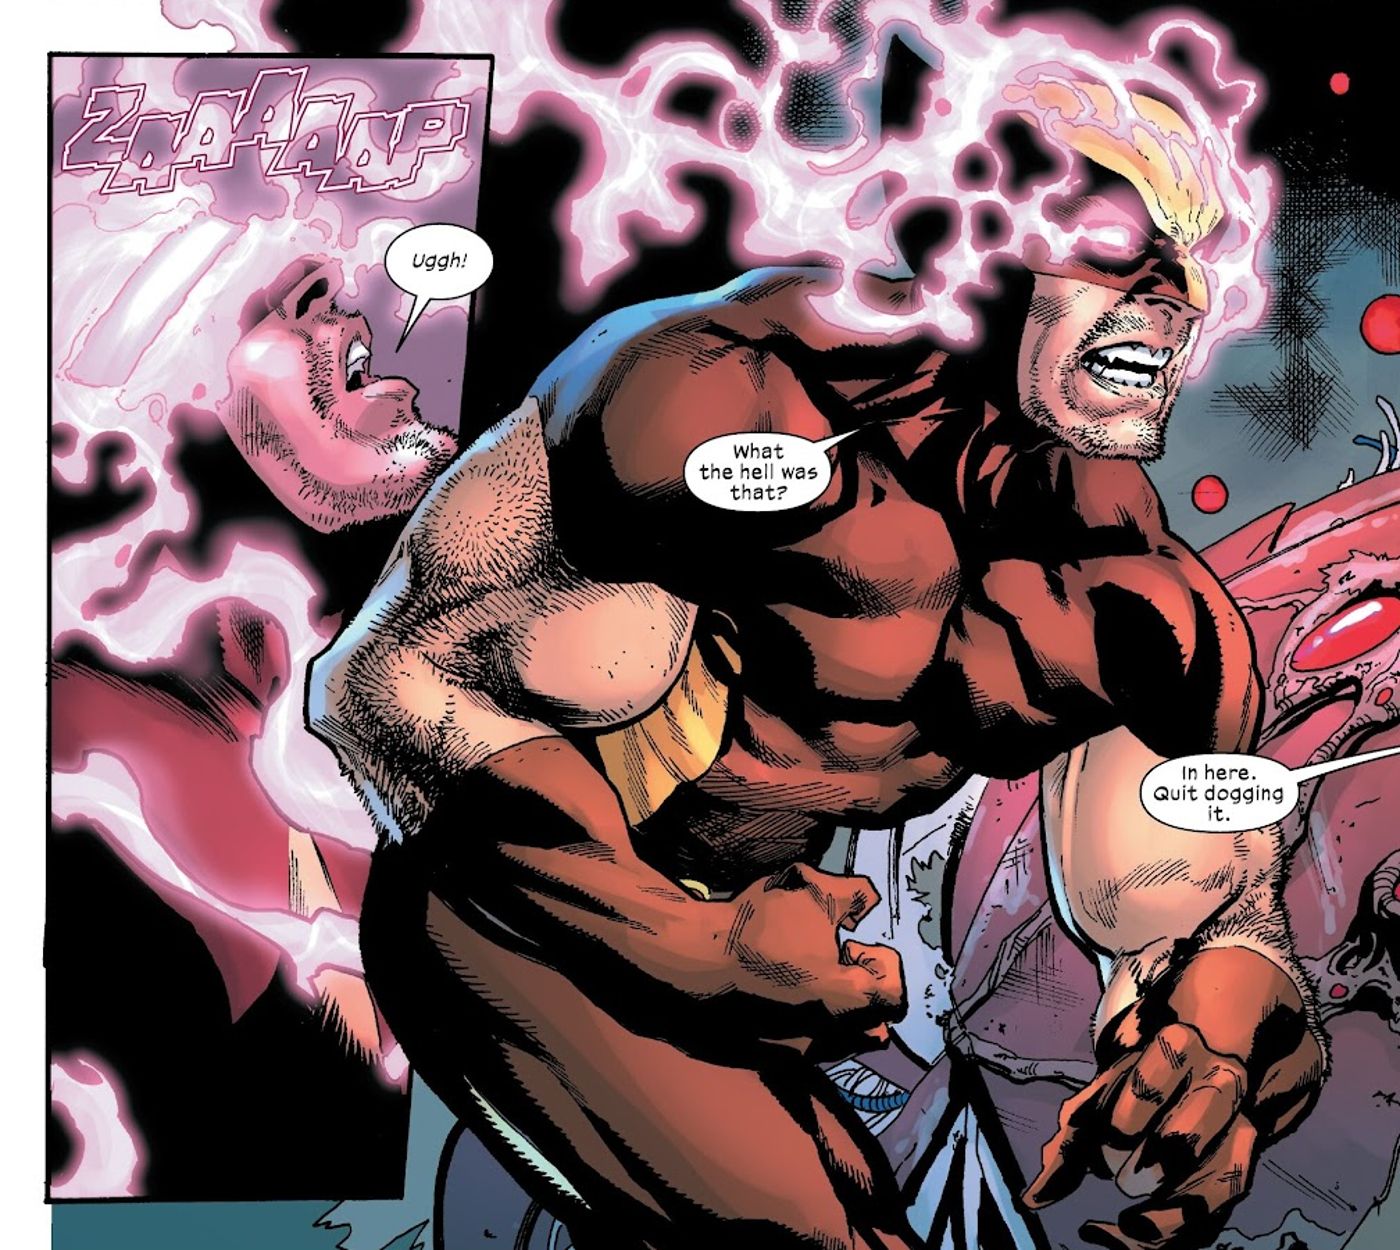 Wolverine #45, Sabretooth uses Kid Omega's powers to take control of Wolverine's mind